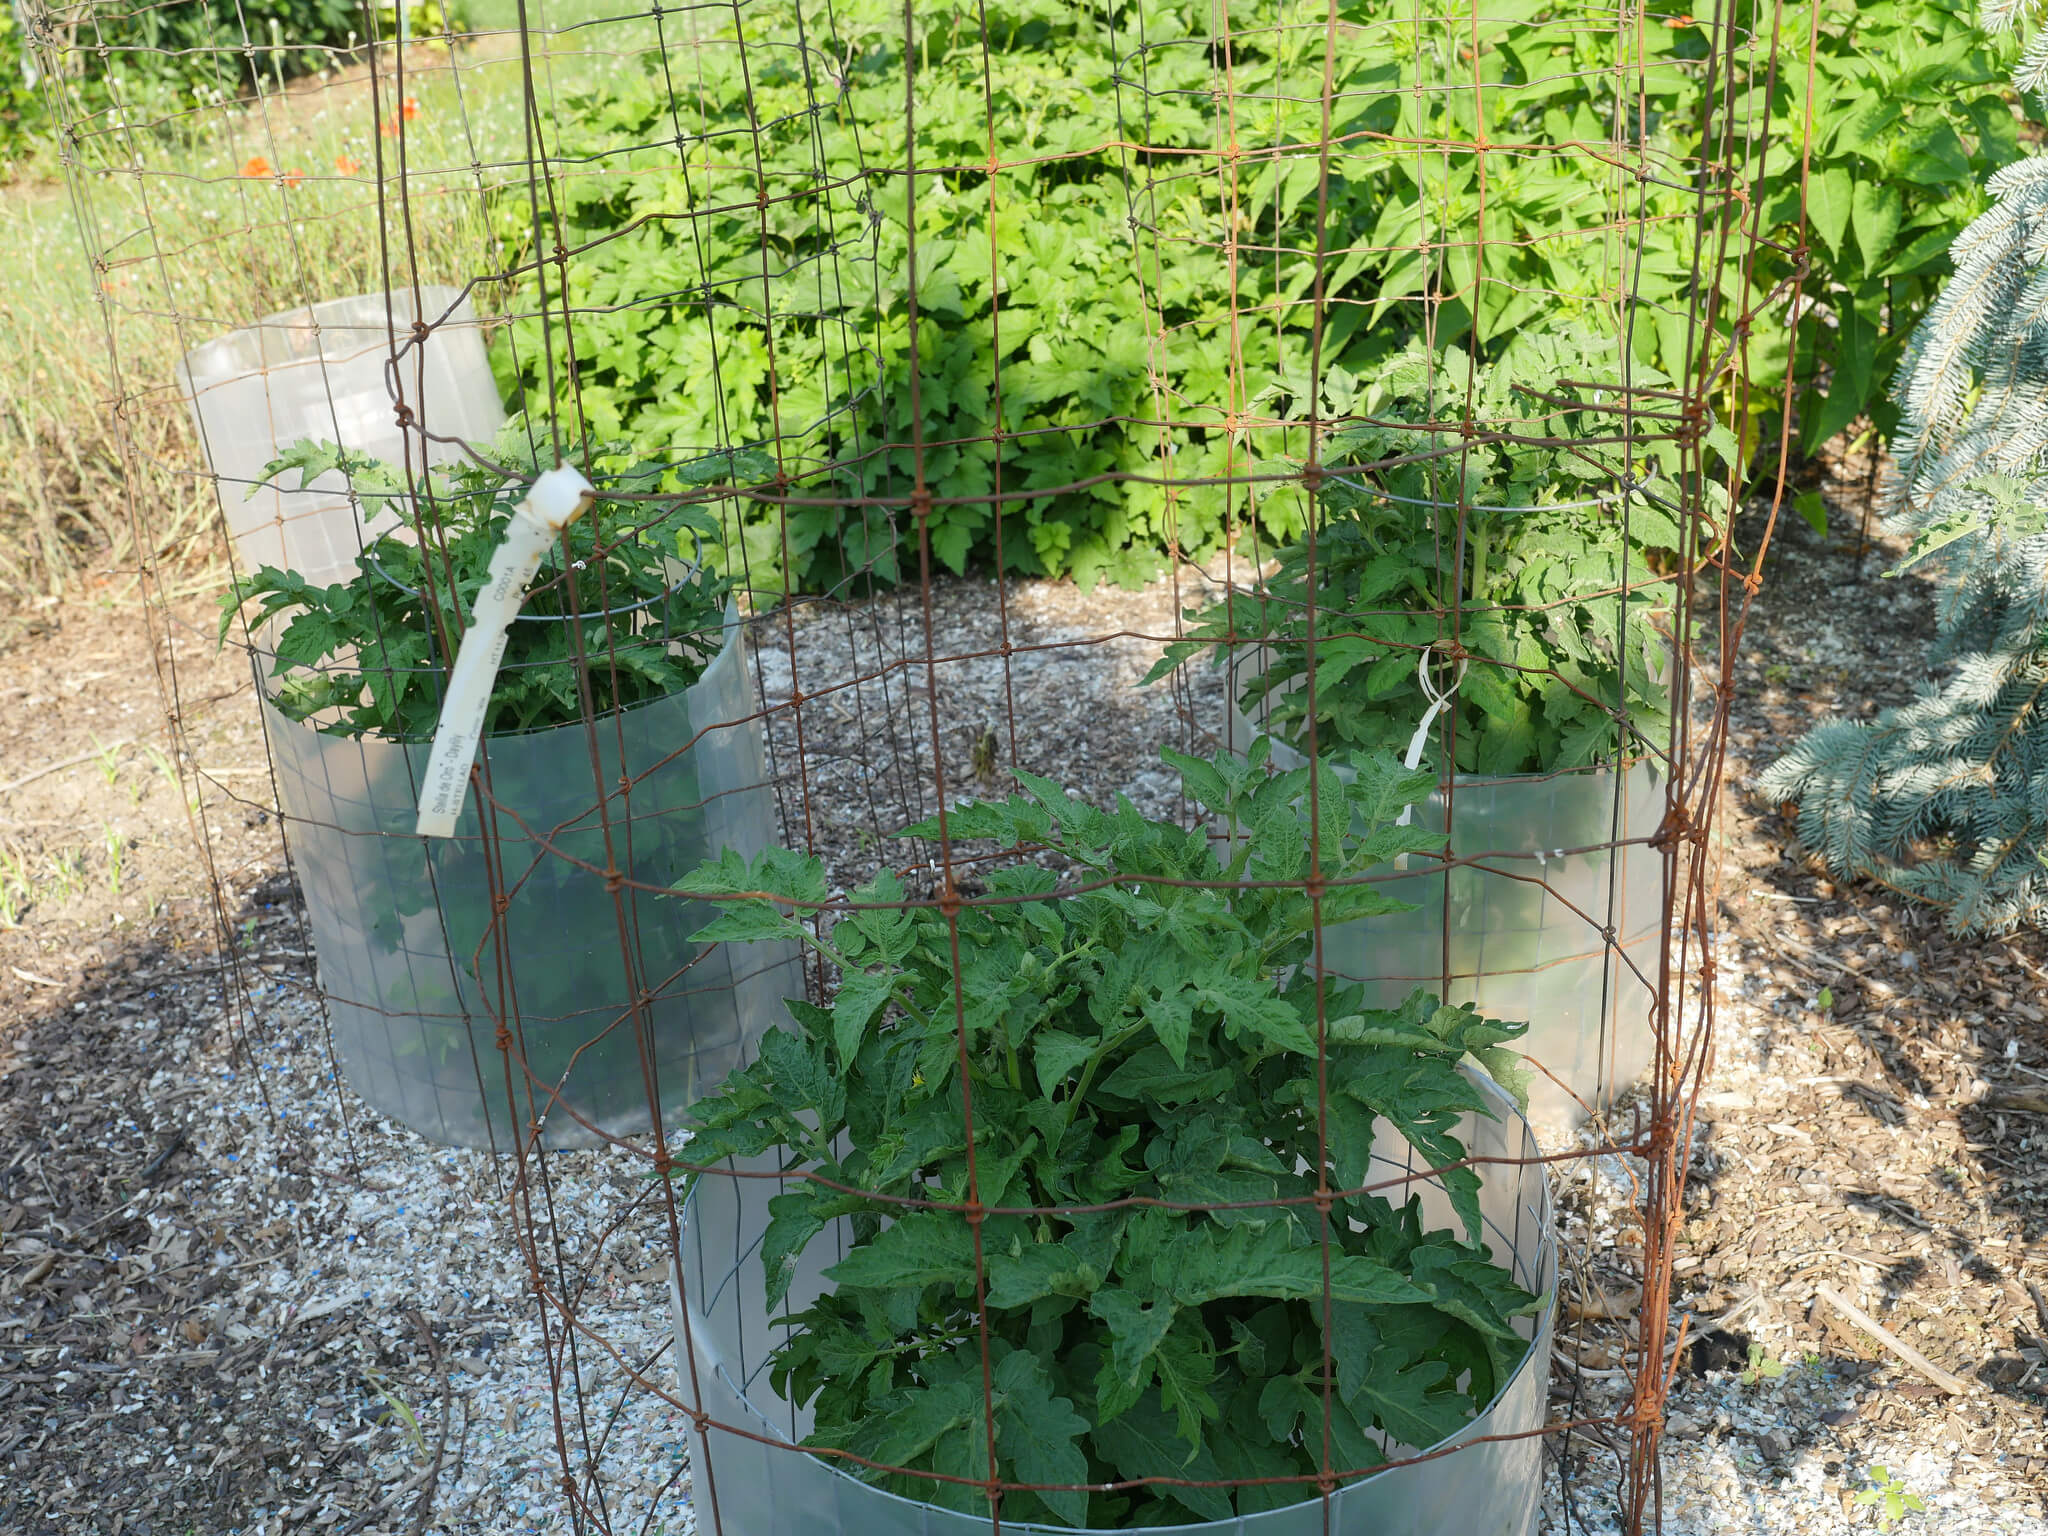 3 Dwarf Boronia tomato plants in containers with tomato cages surrounding them.